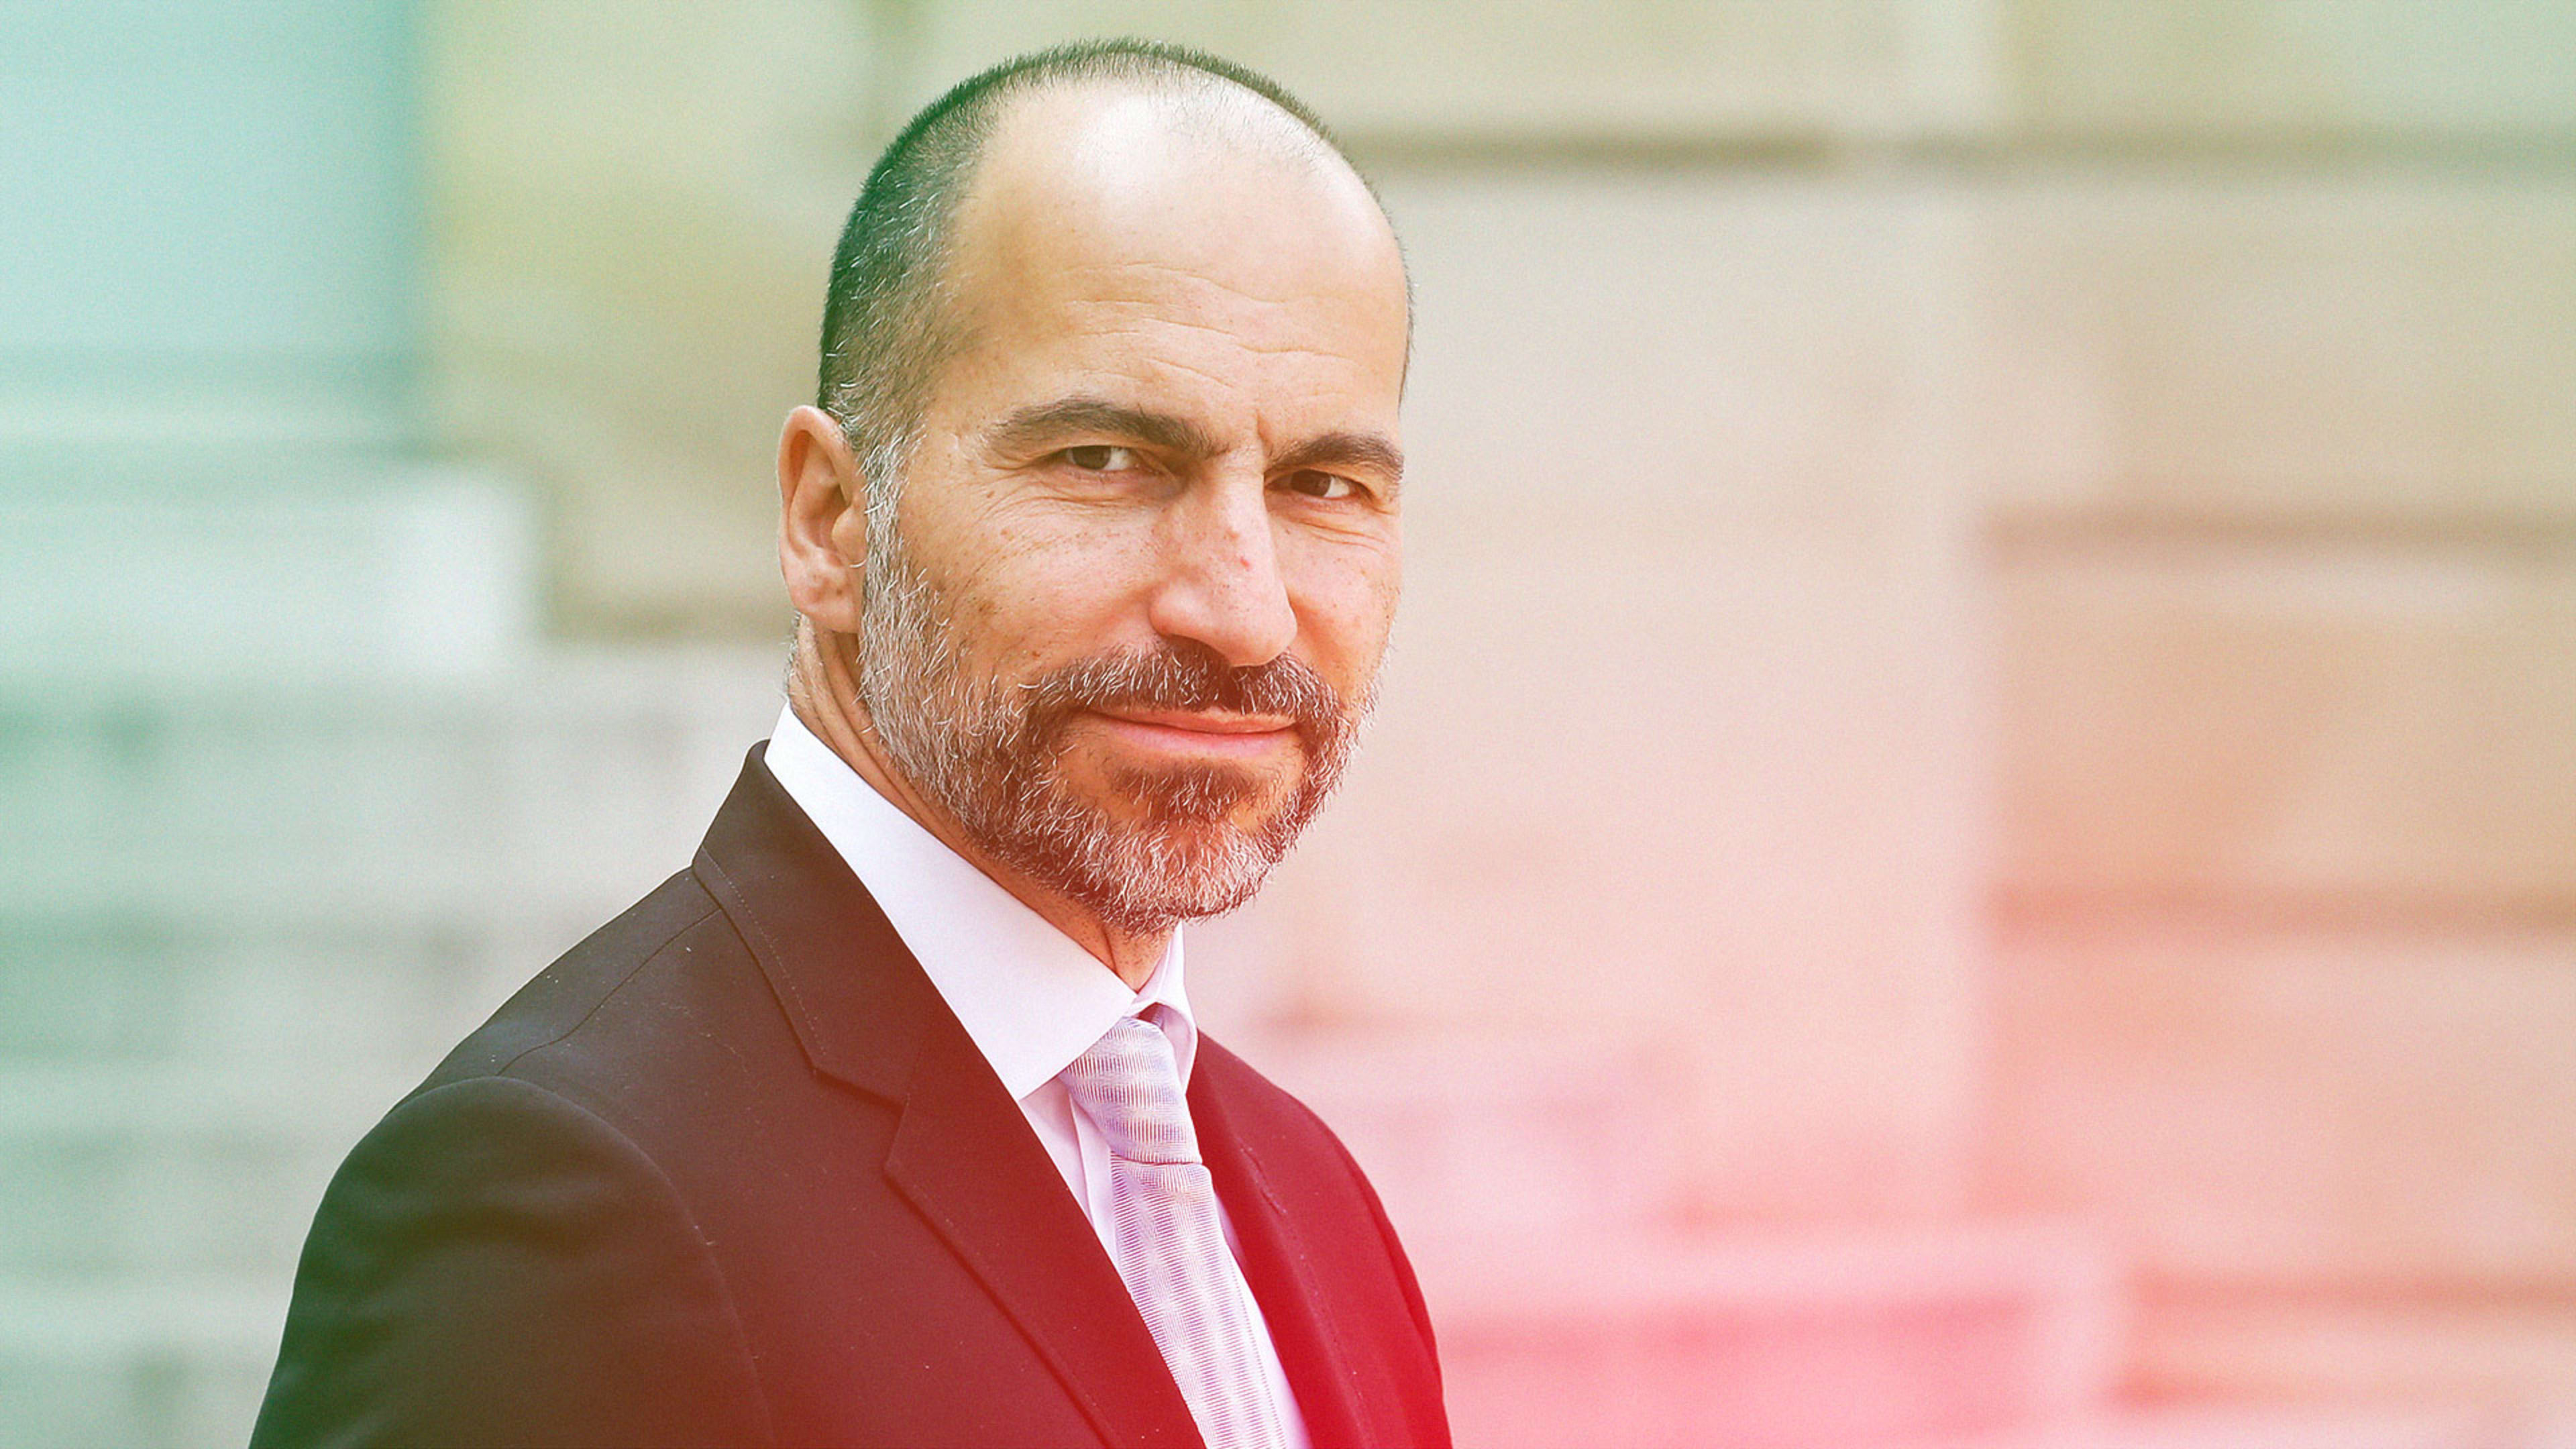 Dara Khosrowshahi and 39 other Iranians who power Silicon Valley